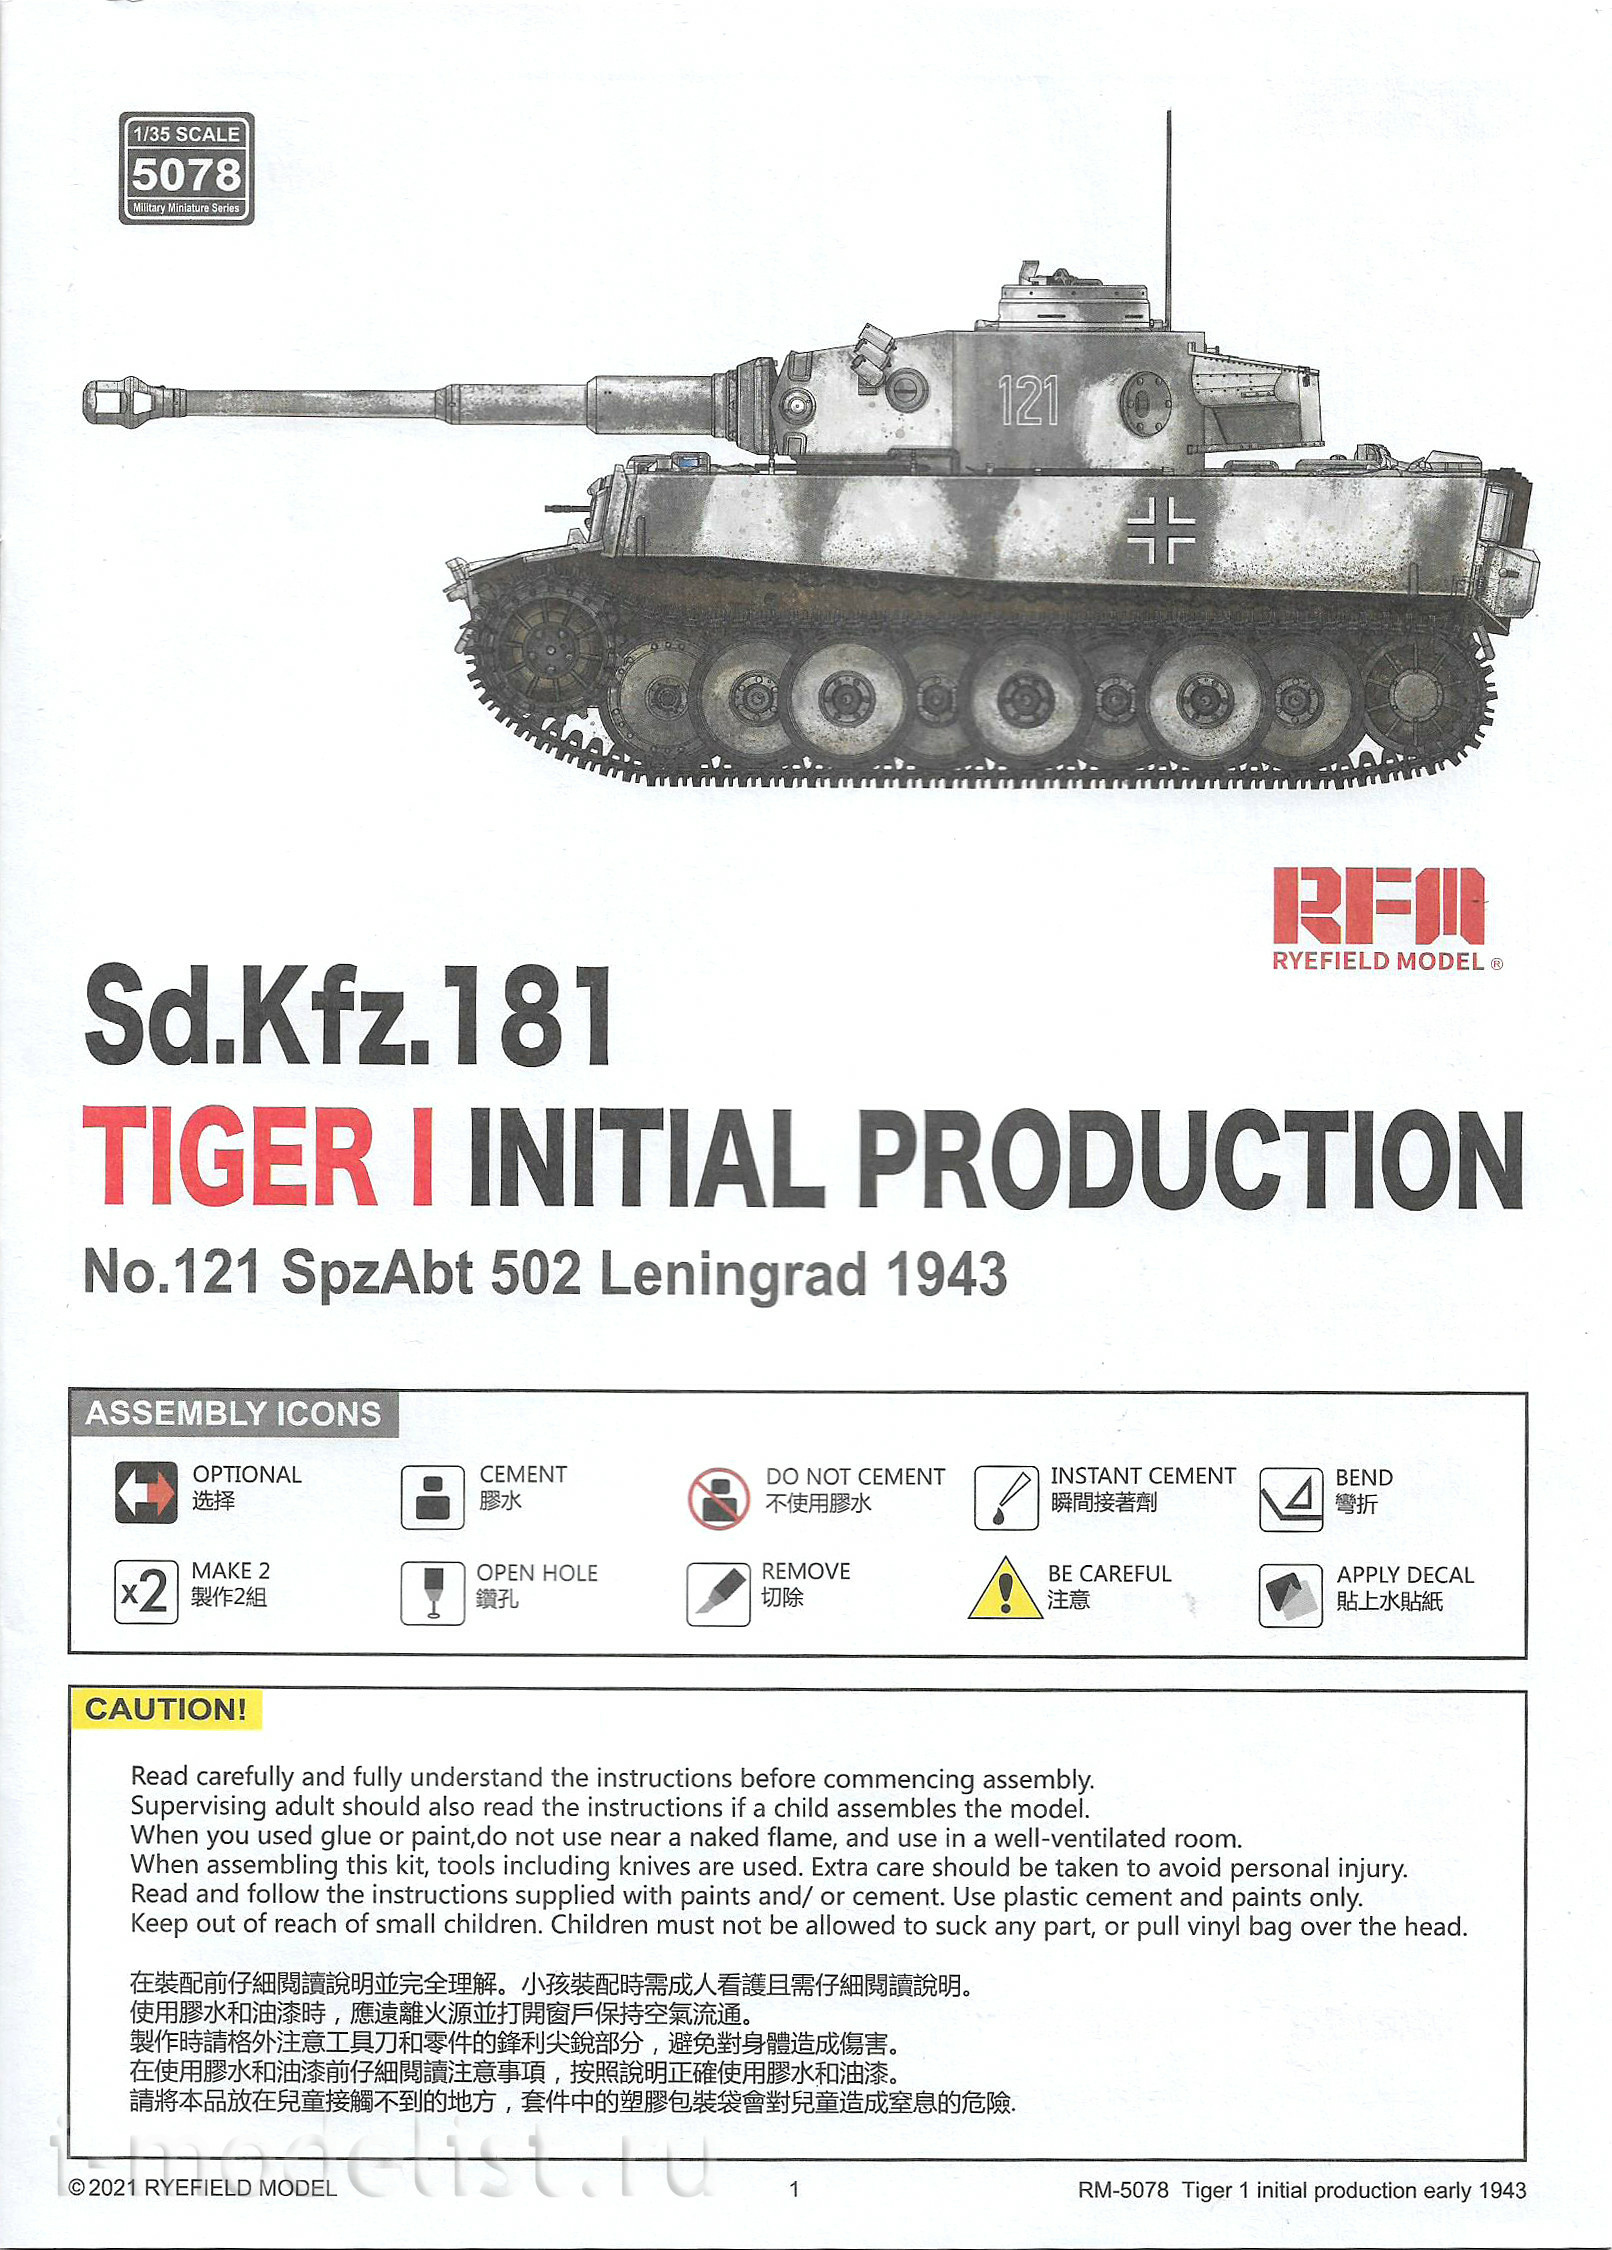 RM-5078 Rye Field Model 1/35 Sd.Kfz.181 Tiger I INITIAL PRODUCTION